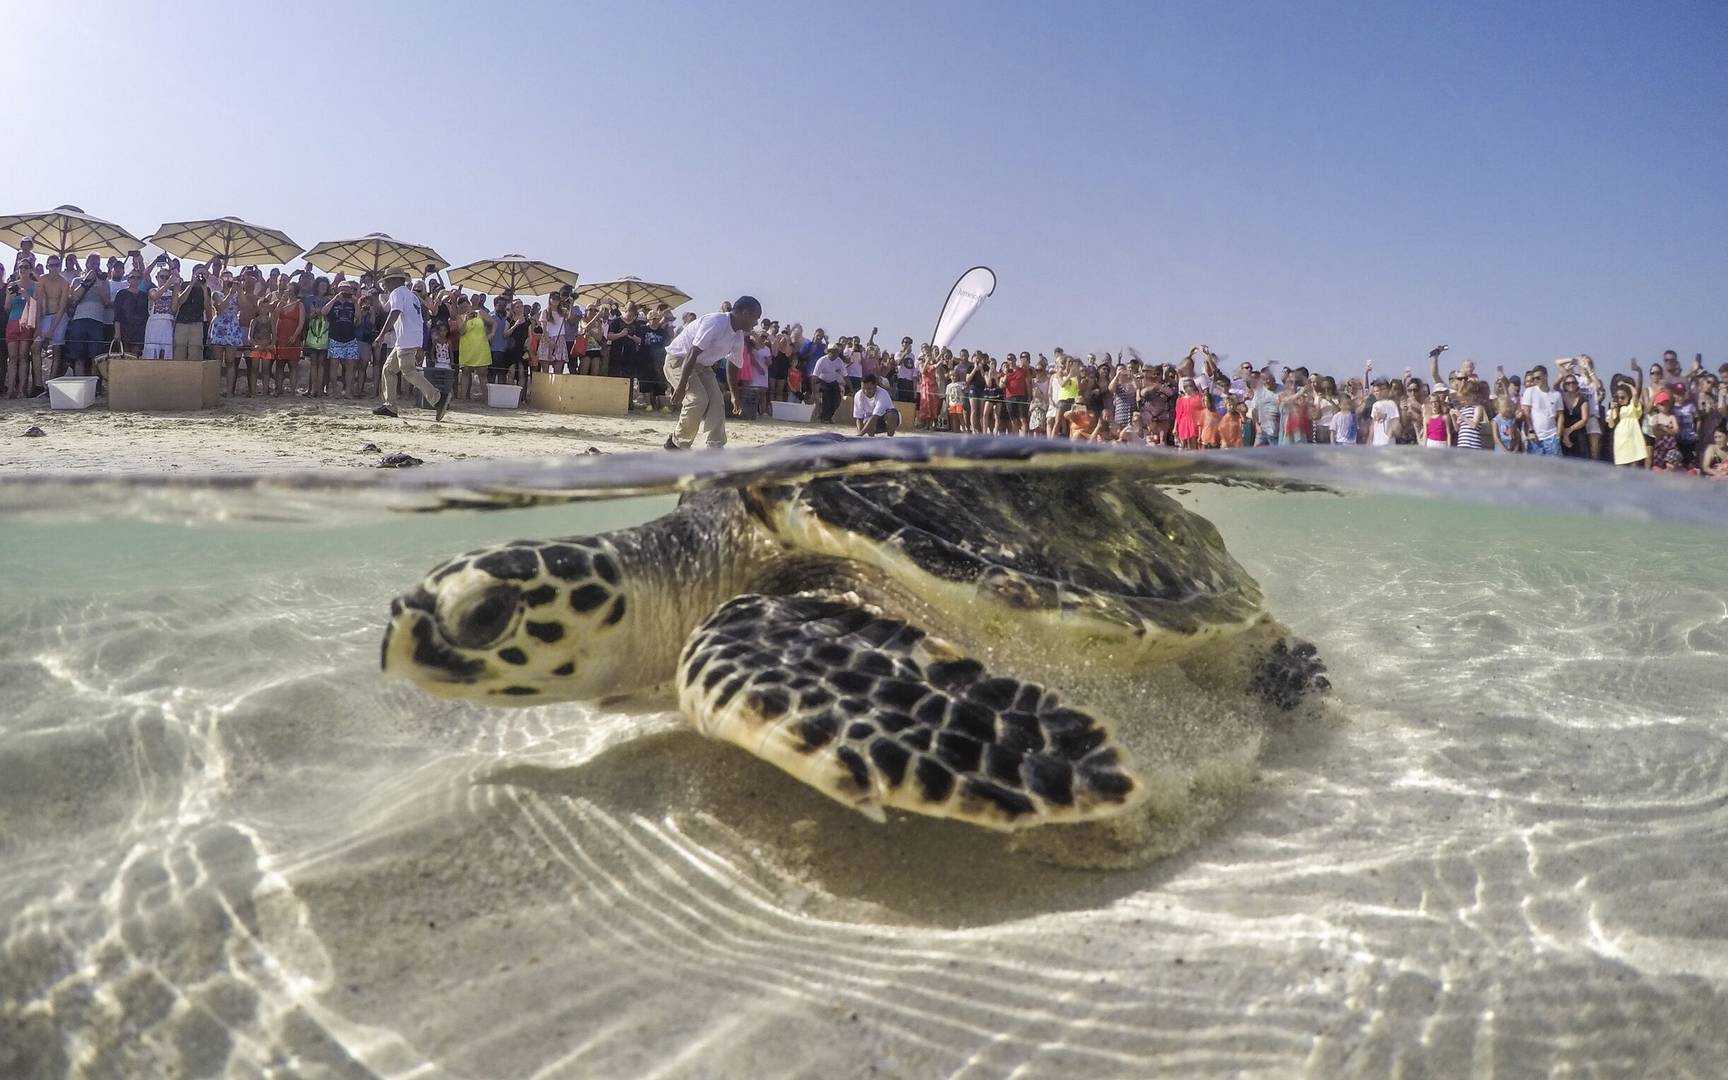  A turtle is released back into the wild at Jumeirah Al Naseem